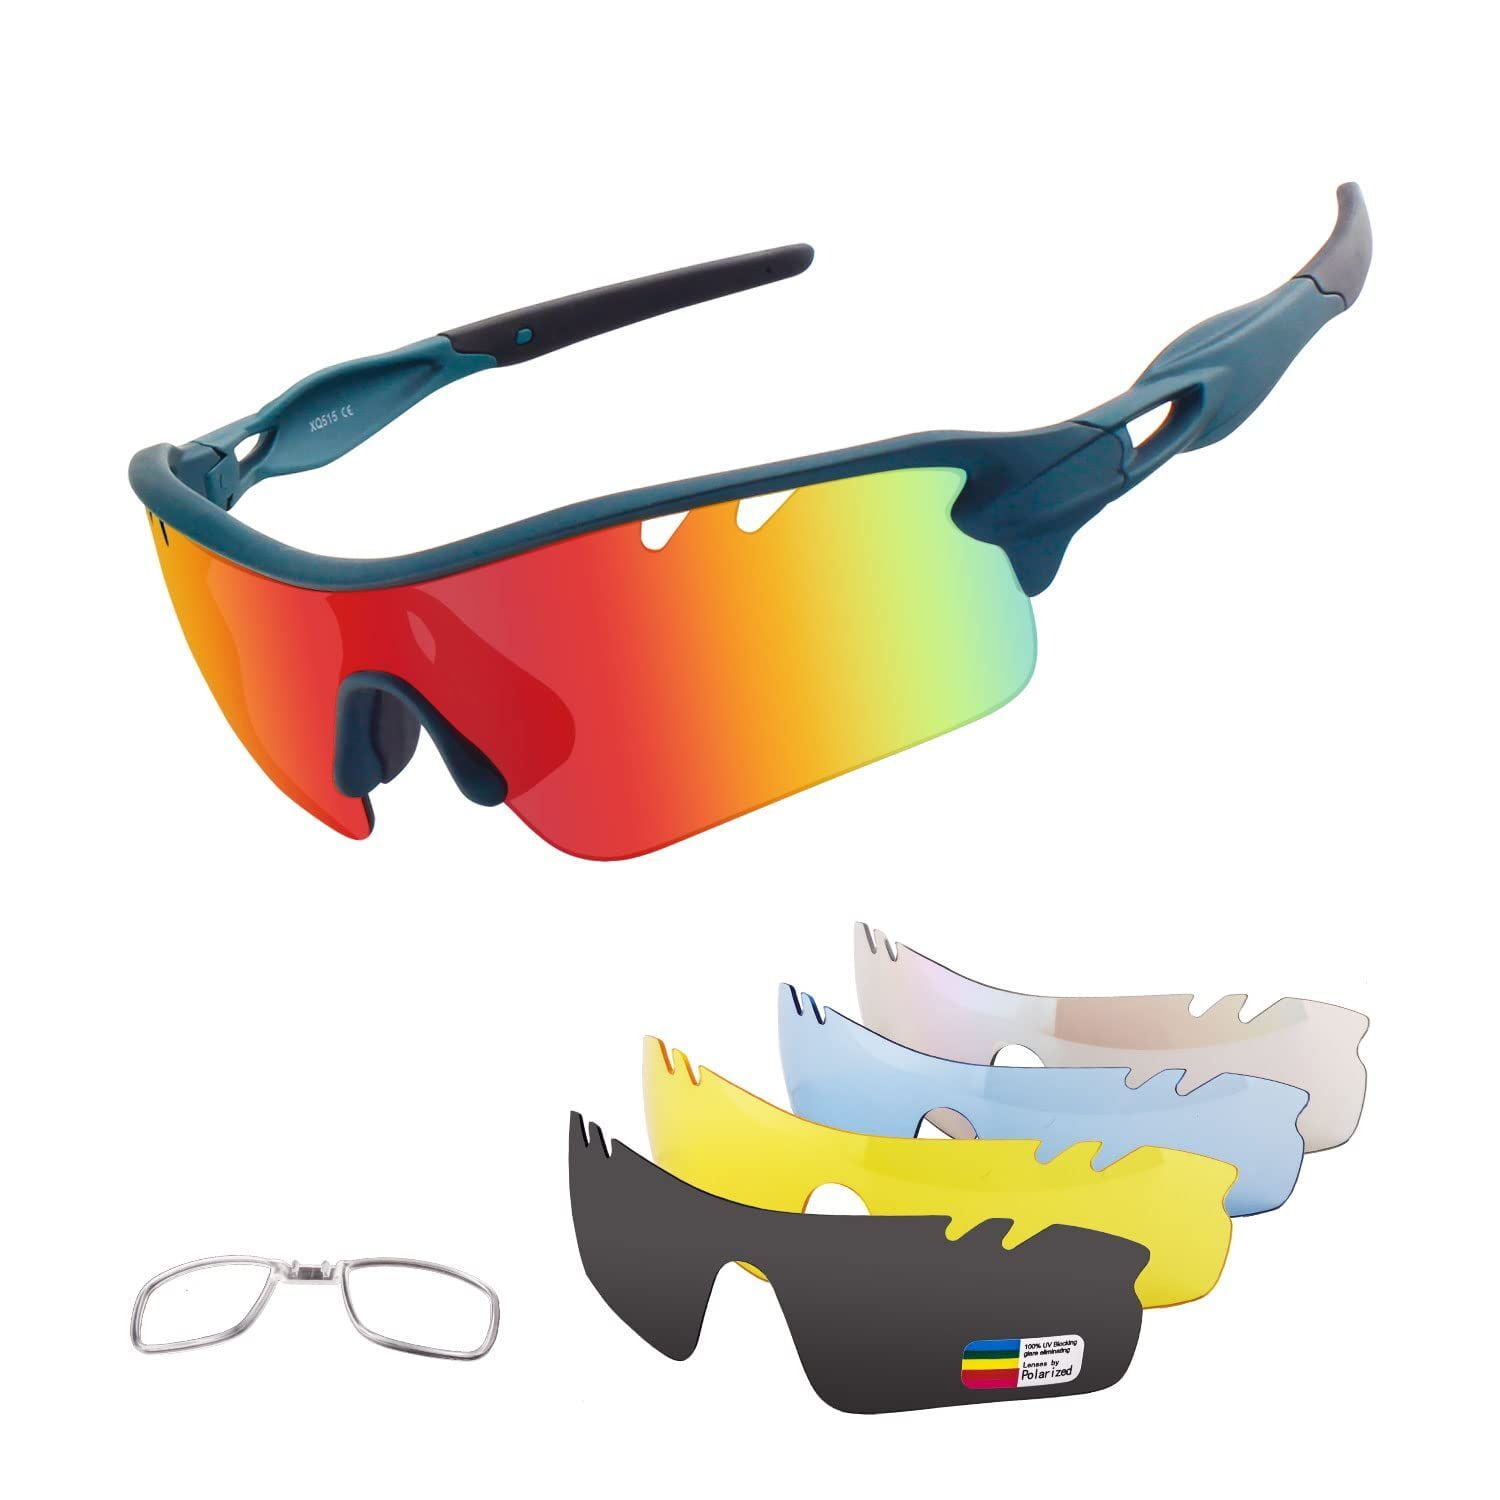 Polarized Cycling Glasses,UV400 Protection Sports Sunglasses Biking with 4 Lens 